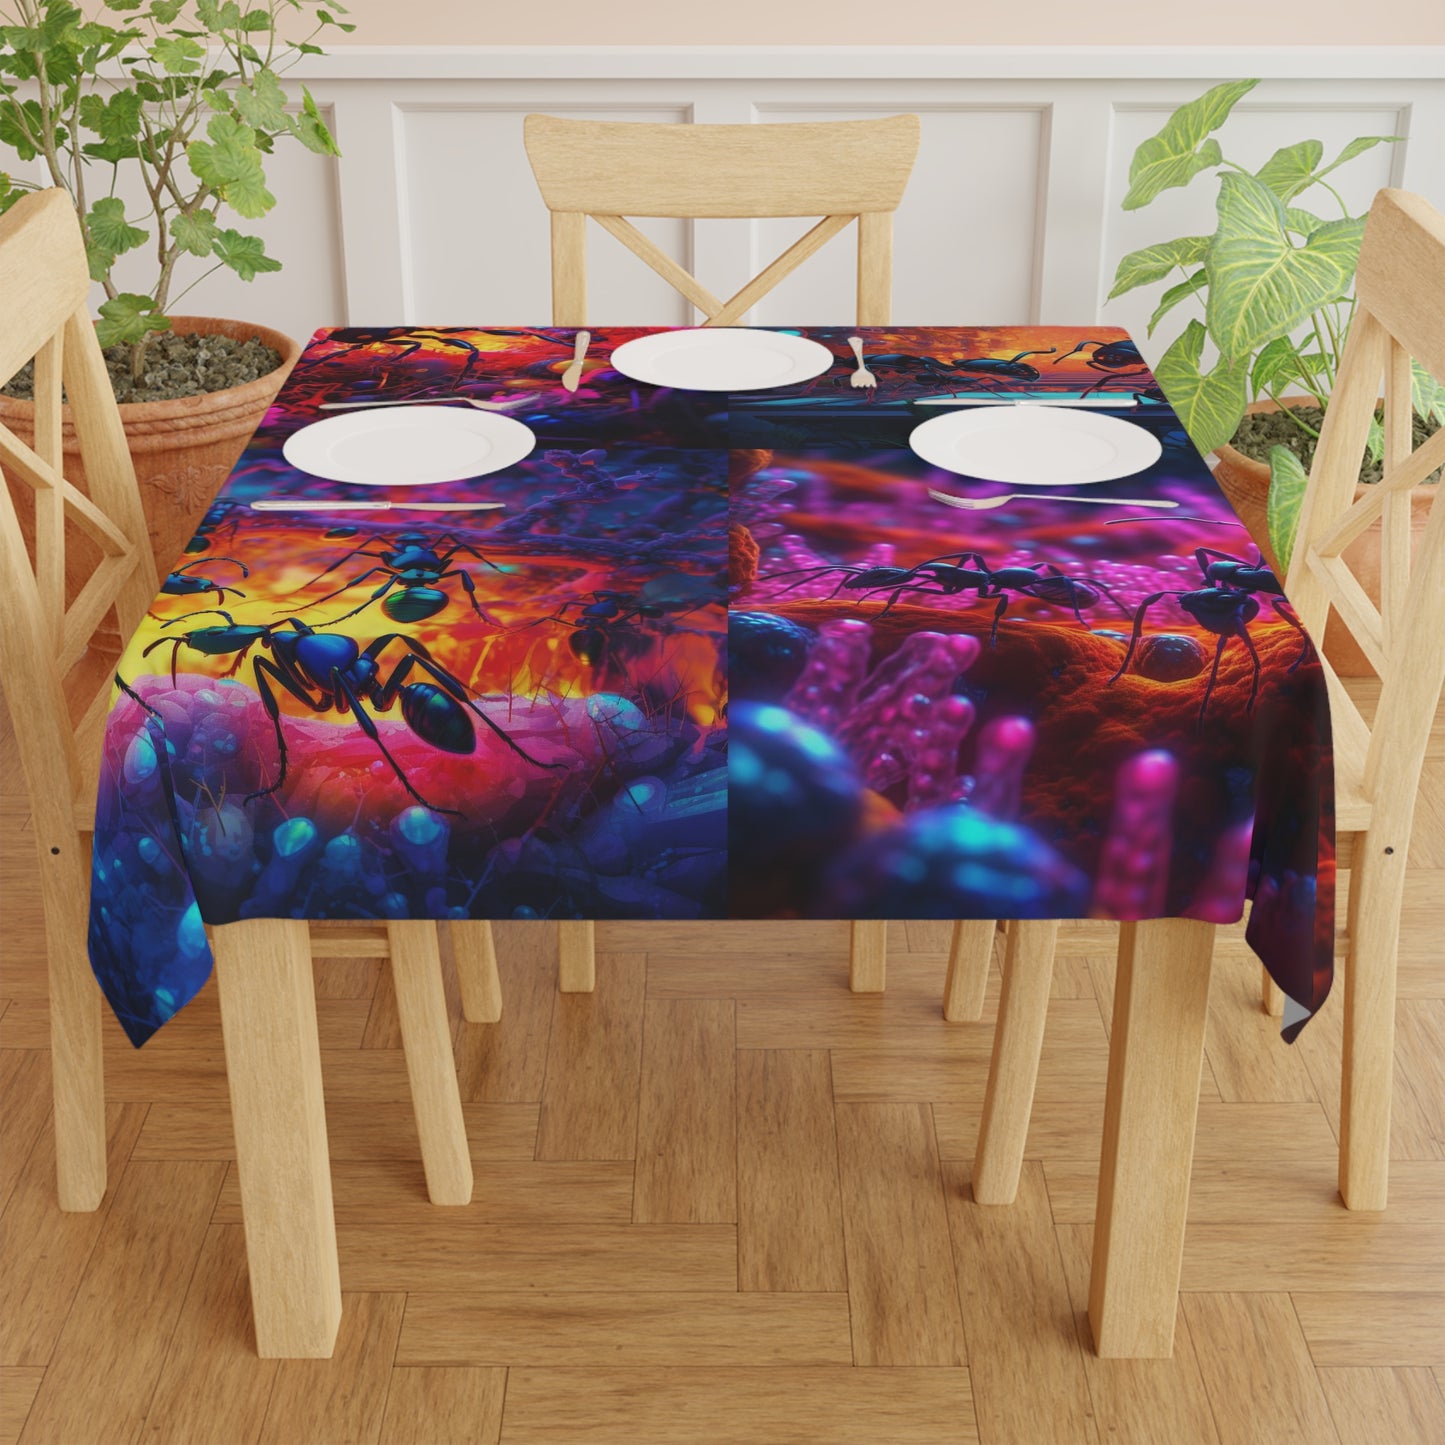 Tablecloth Ants Home 5